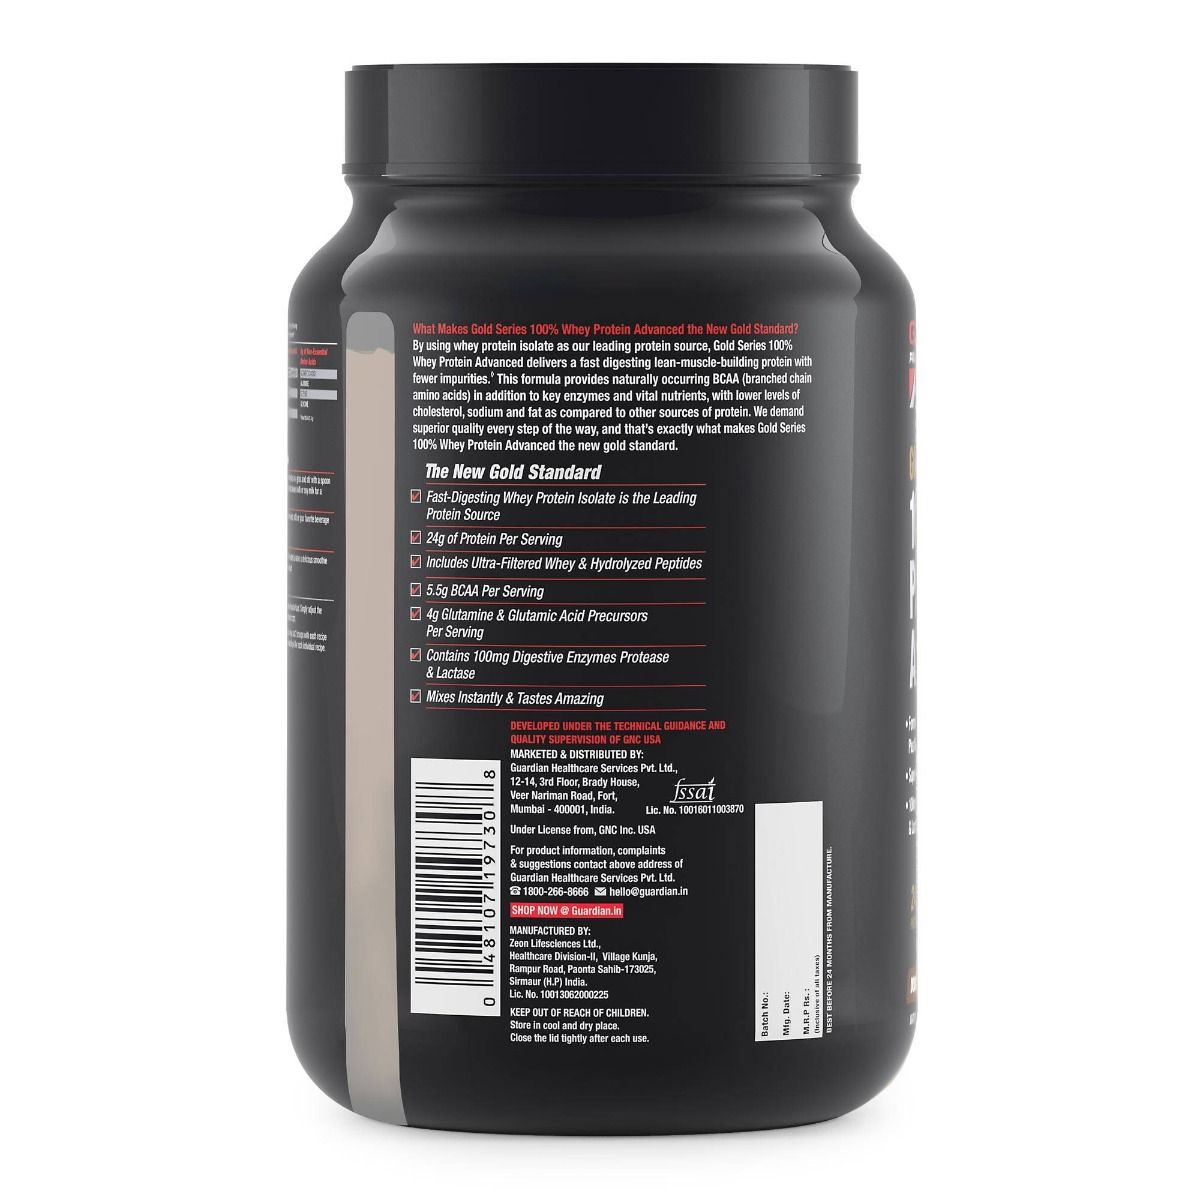 GNC AMP Gold 100% Whey Protein Advanced Double Rich Chocolate Flavoured Powder, 1 kg, Pack of 1 